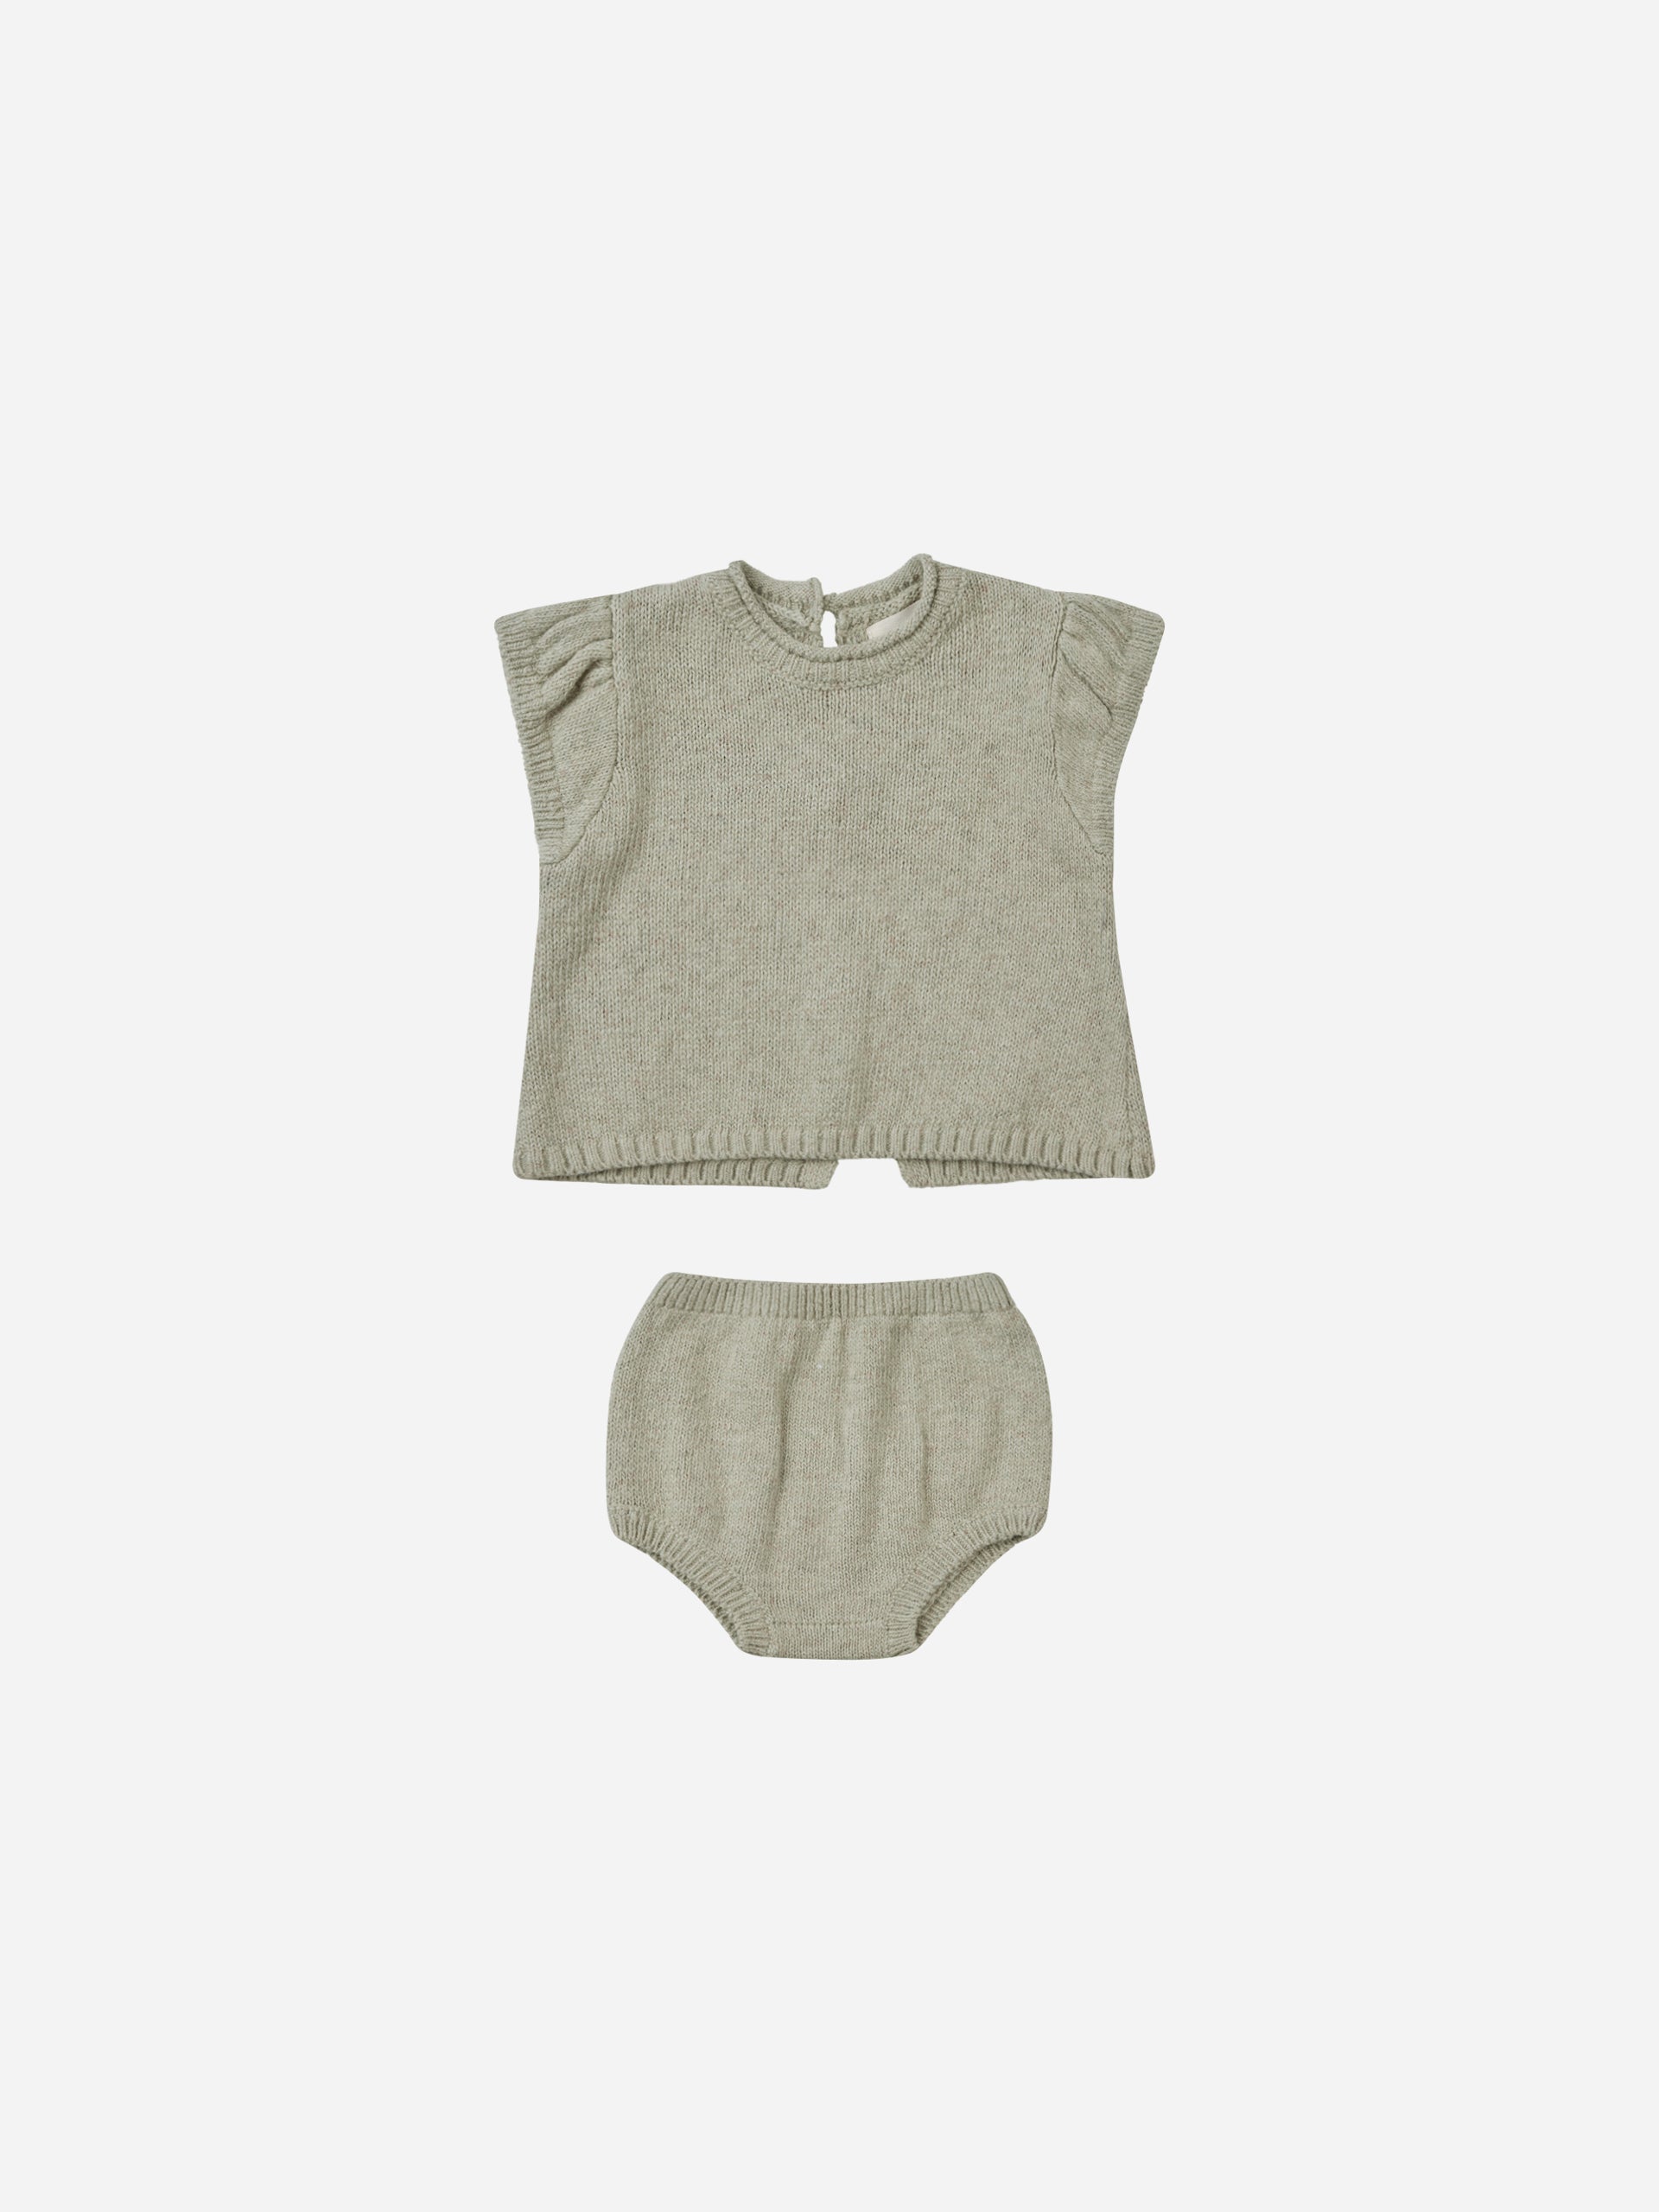 Penny Knit Set || Sage - Rylee + Cru | Kids Clothes | Trendy Baby Clothes | Modern Infant Outfits |